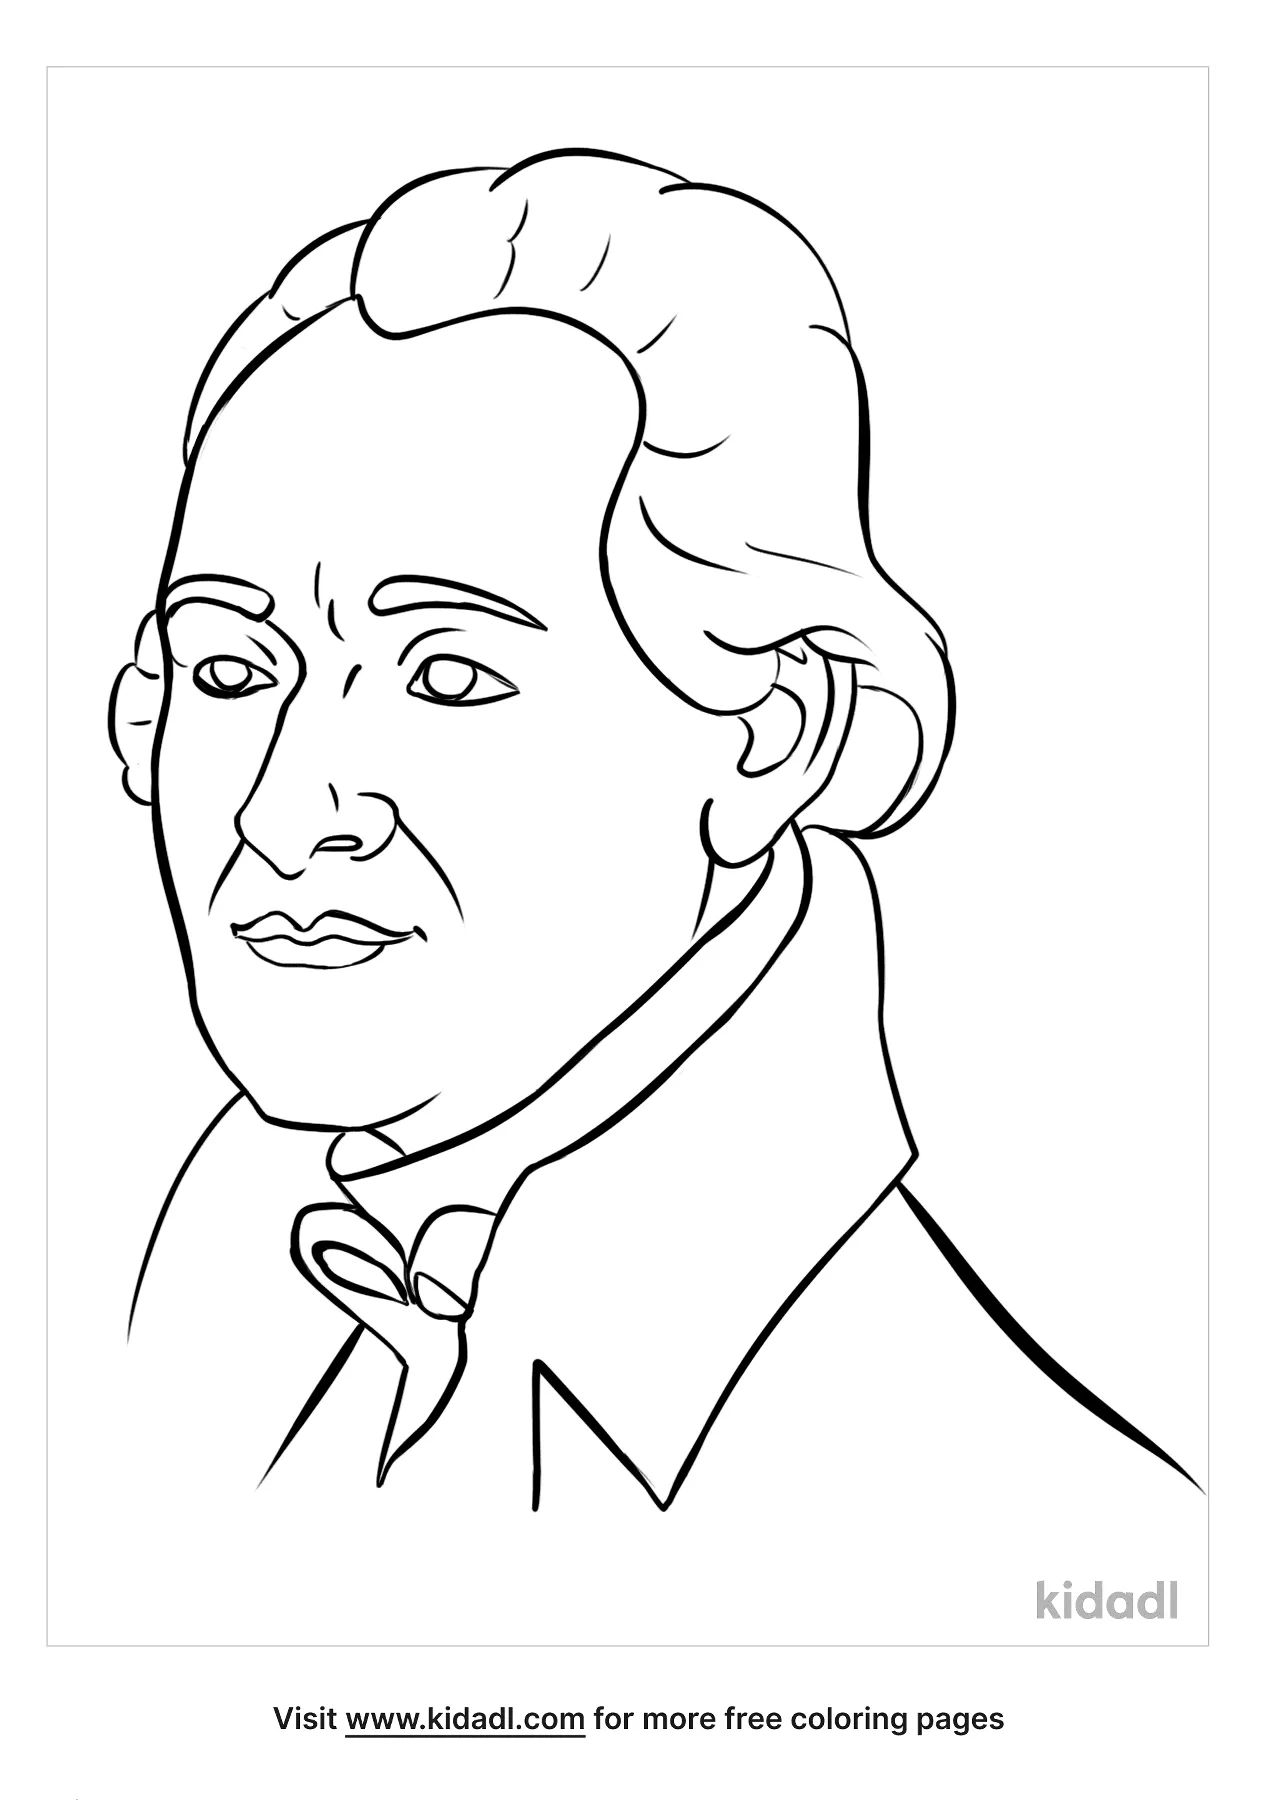 name coloring pages alex